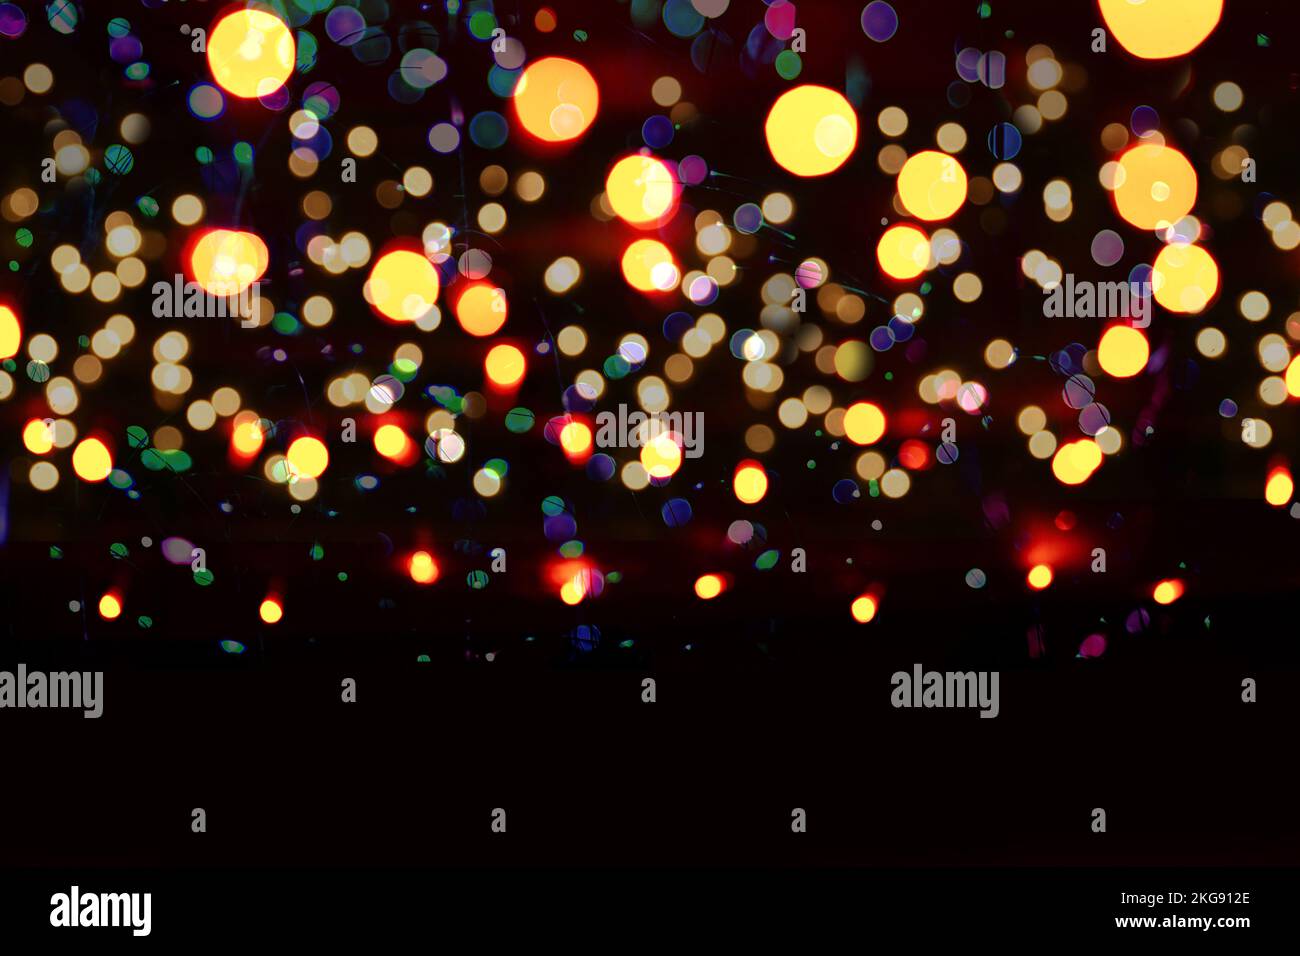 Blurred city festive lighting, illumination, abstract bokeh background. Christmas backdrop for poster Stock Photo